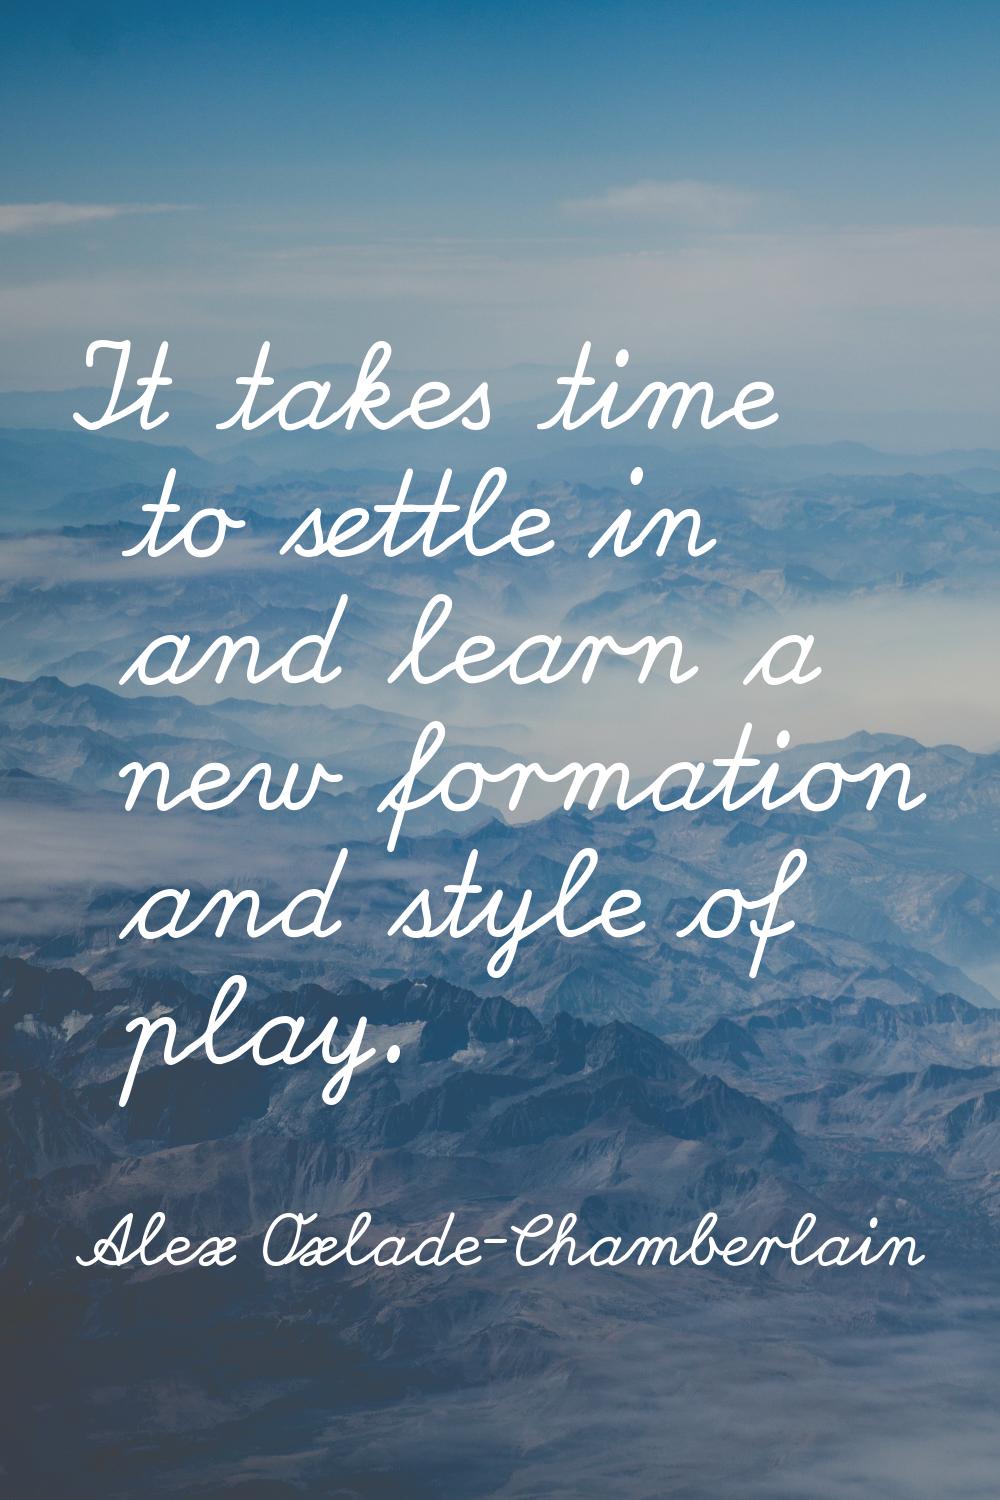 It takes time to settle in and learn a new formation and style of play.